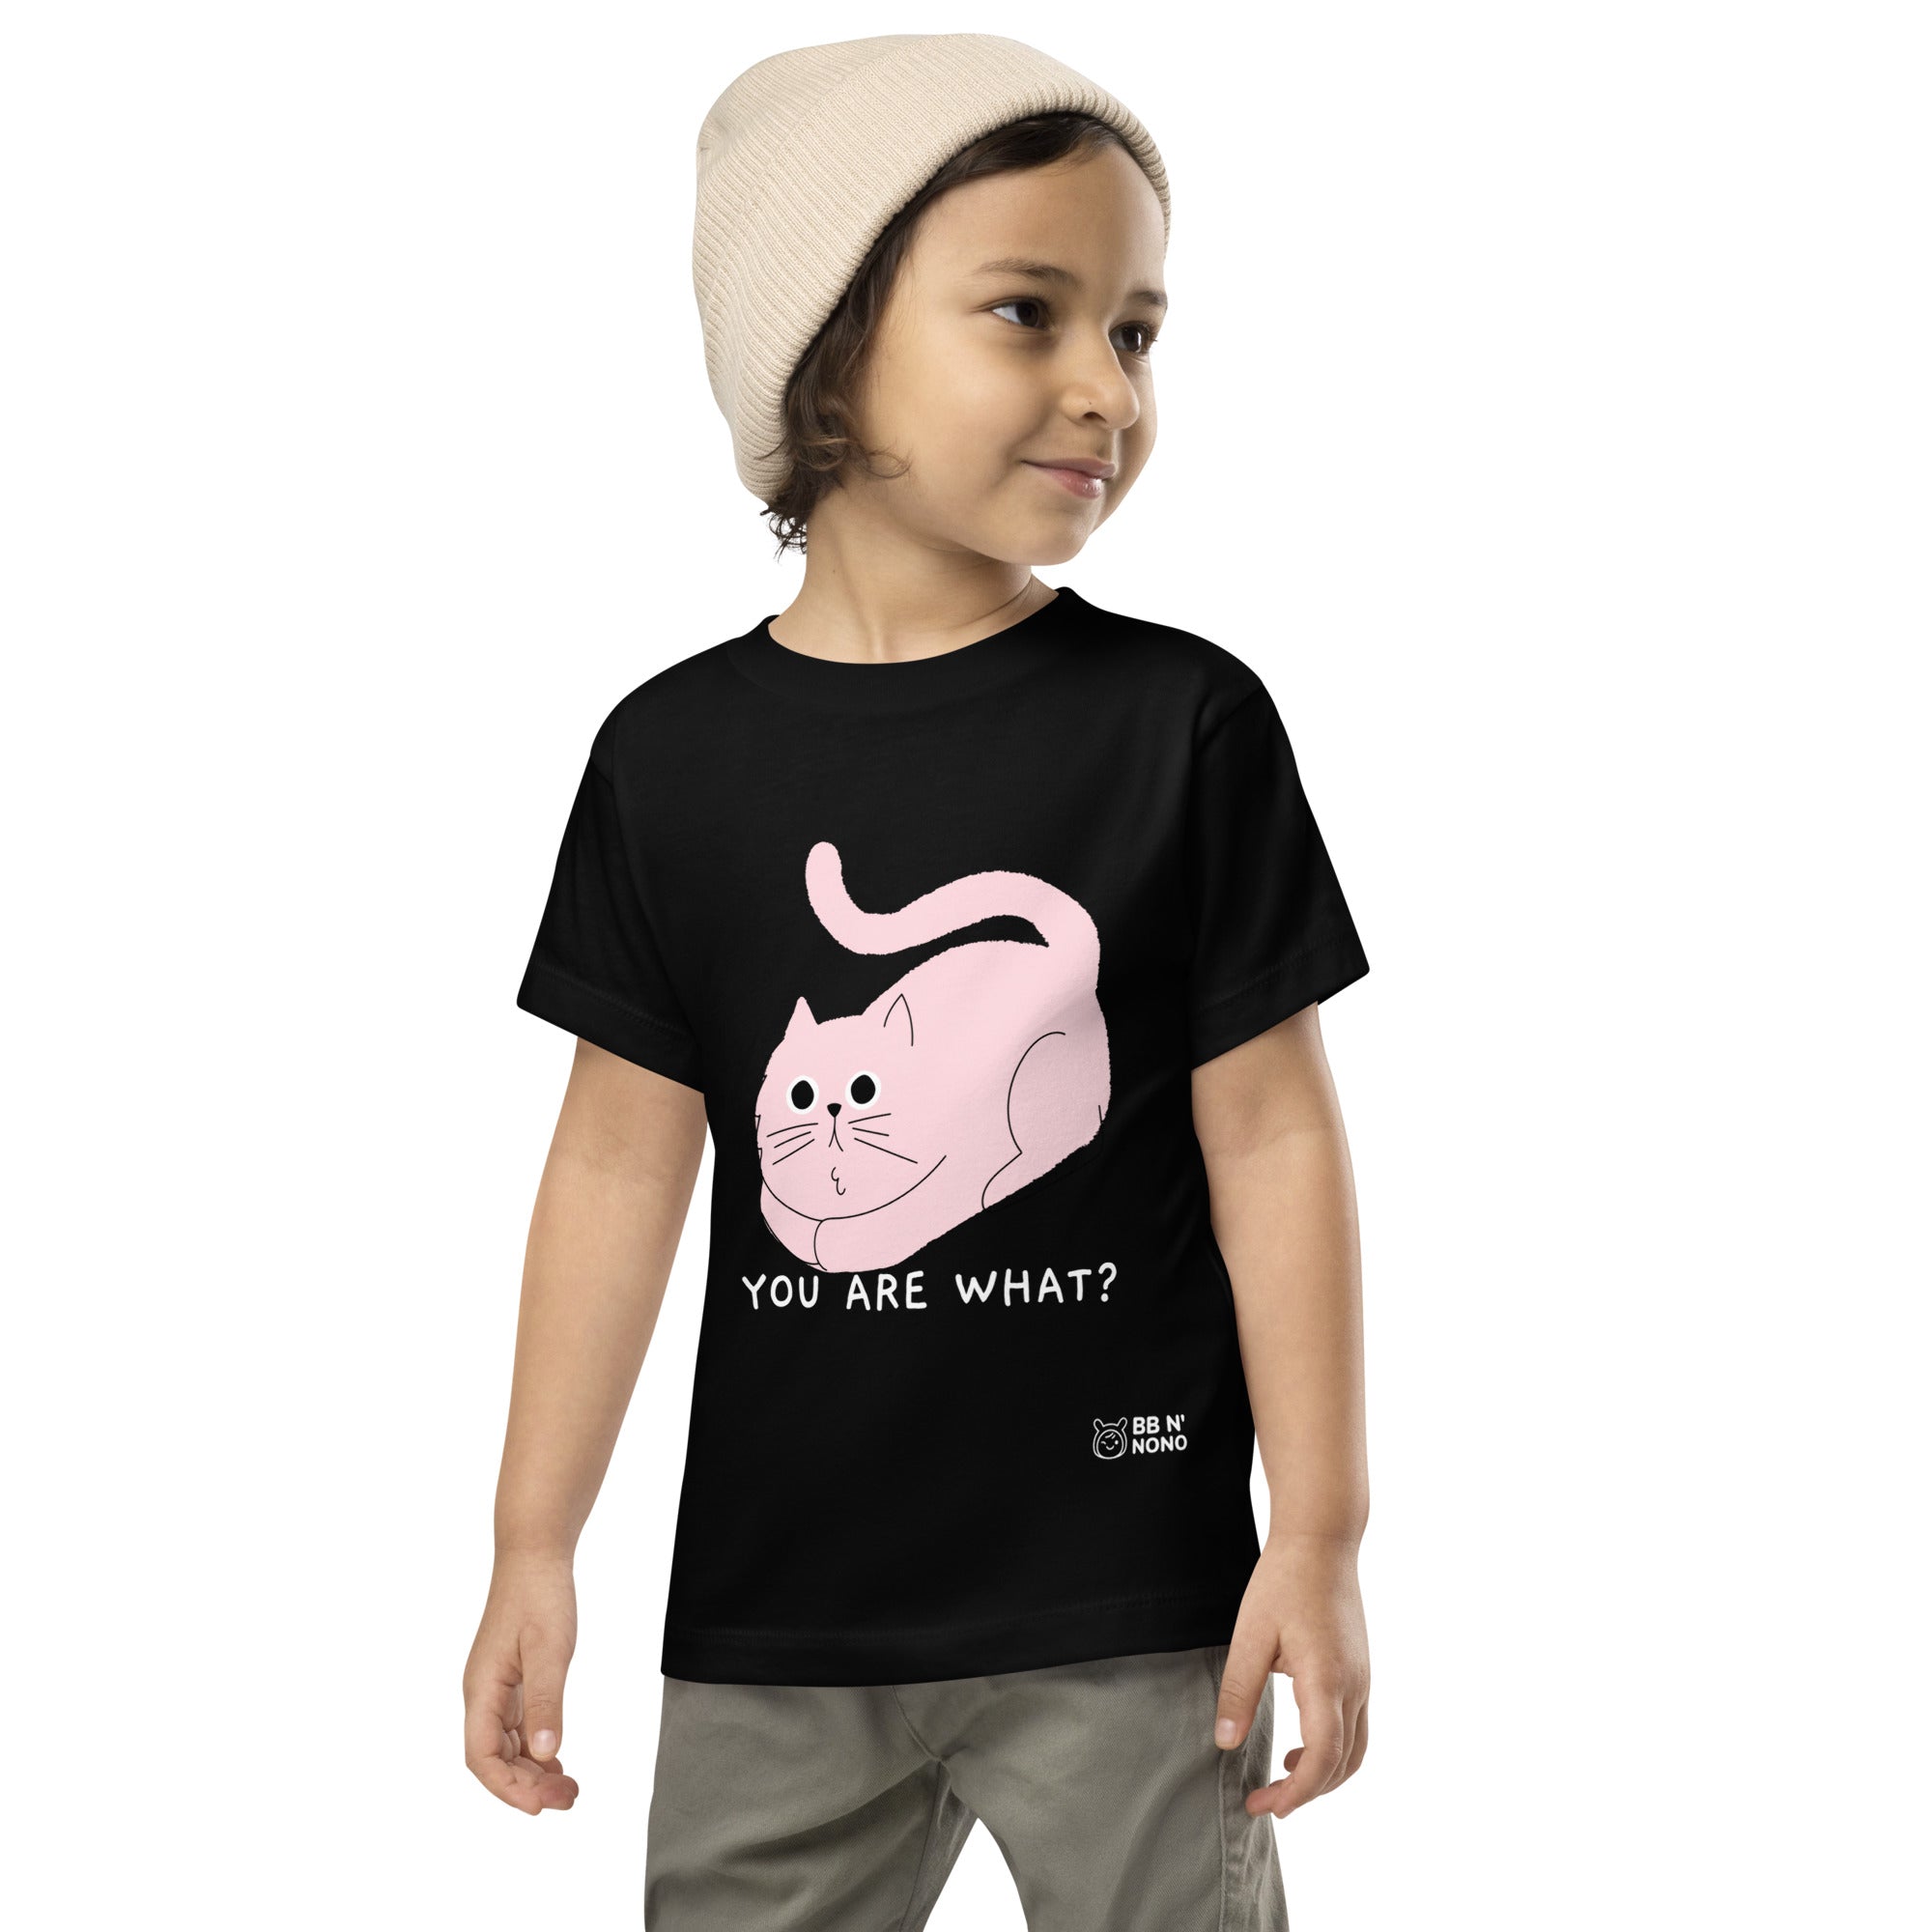 You are what? - Toddler Short Sleeve Tee